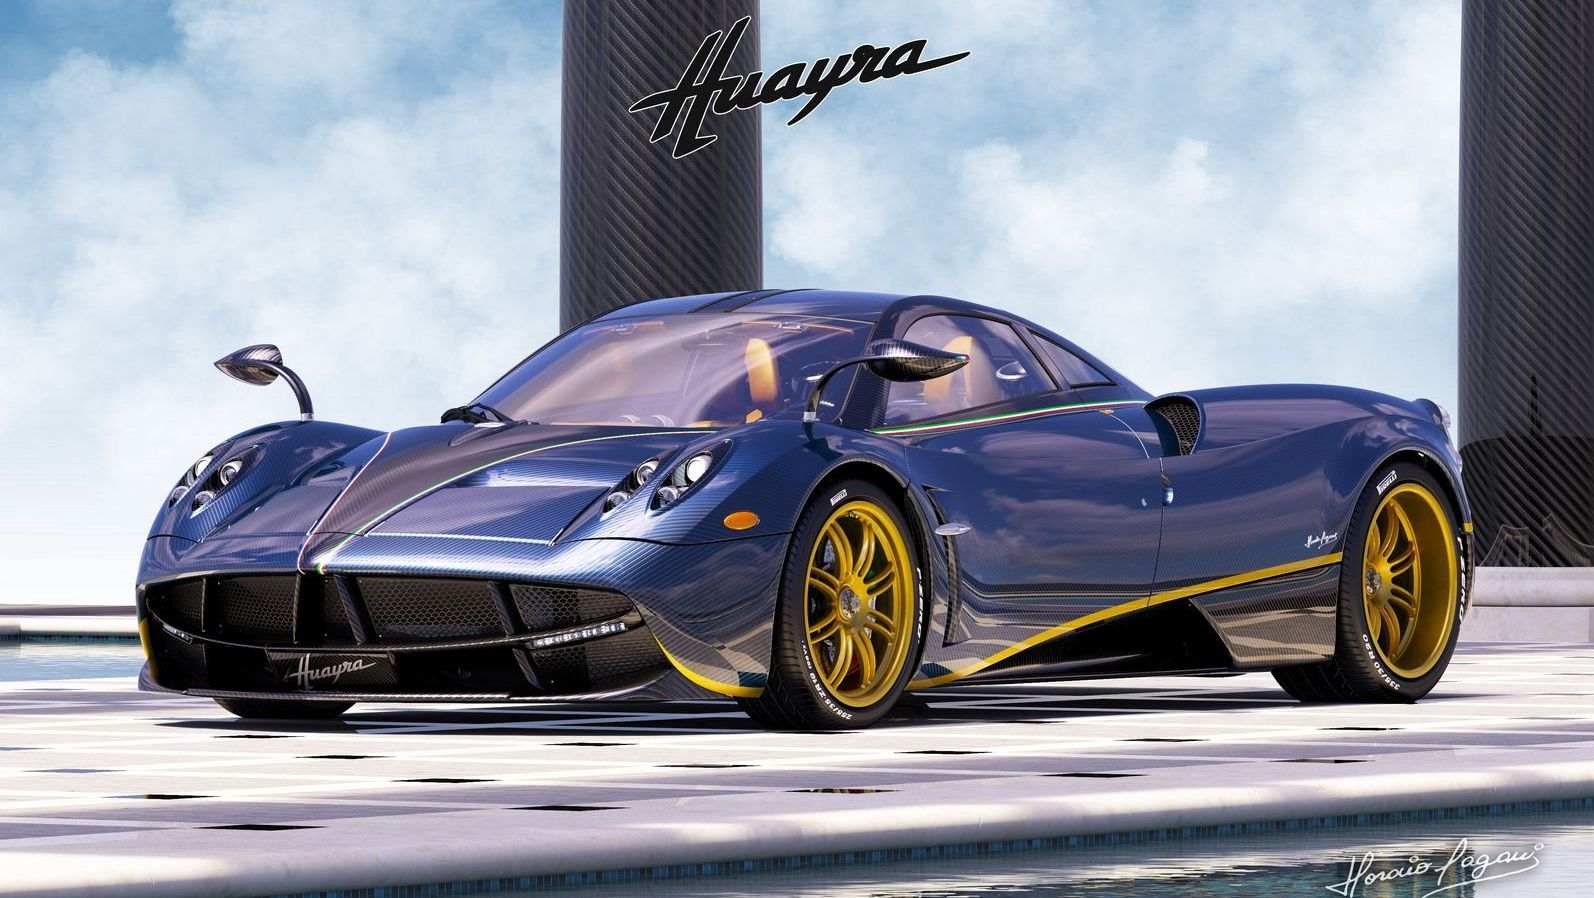  Check out this custom Pagani Huayra 730 S built for Mexican movie producer Alejandro Salomon, it's simply awesome.  